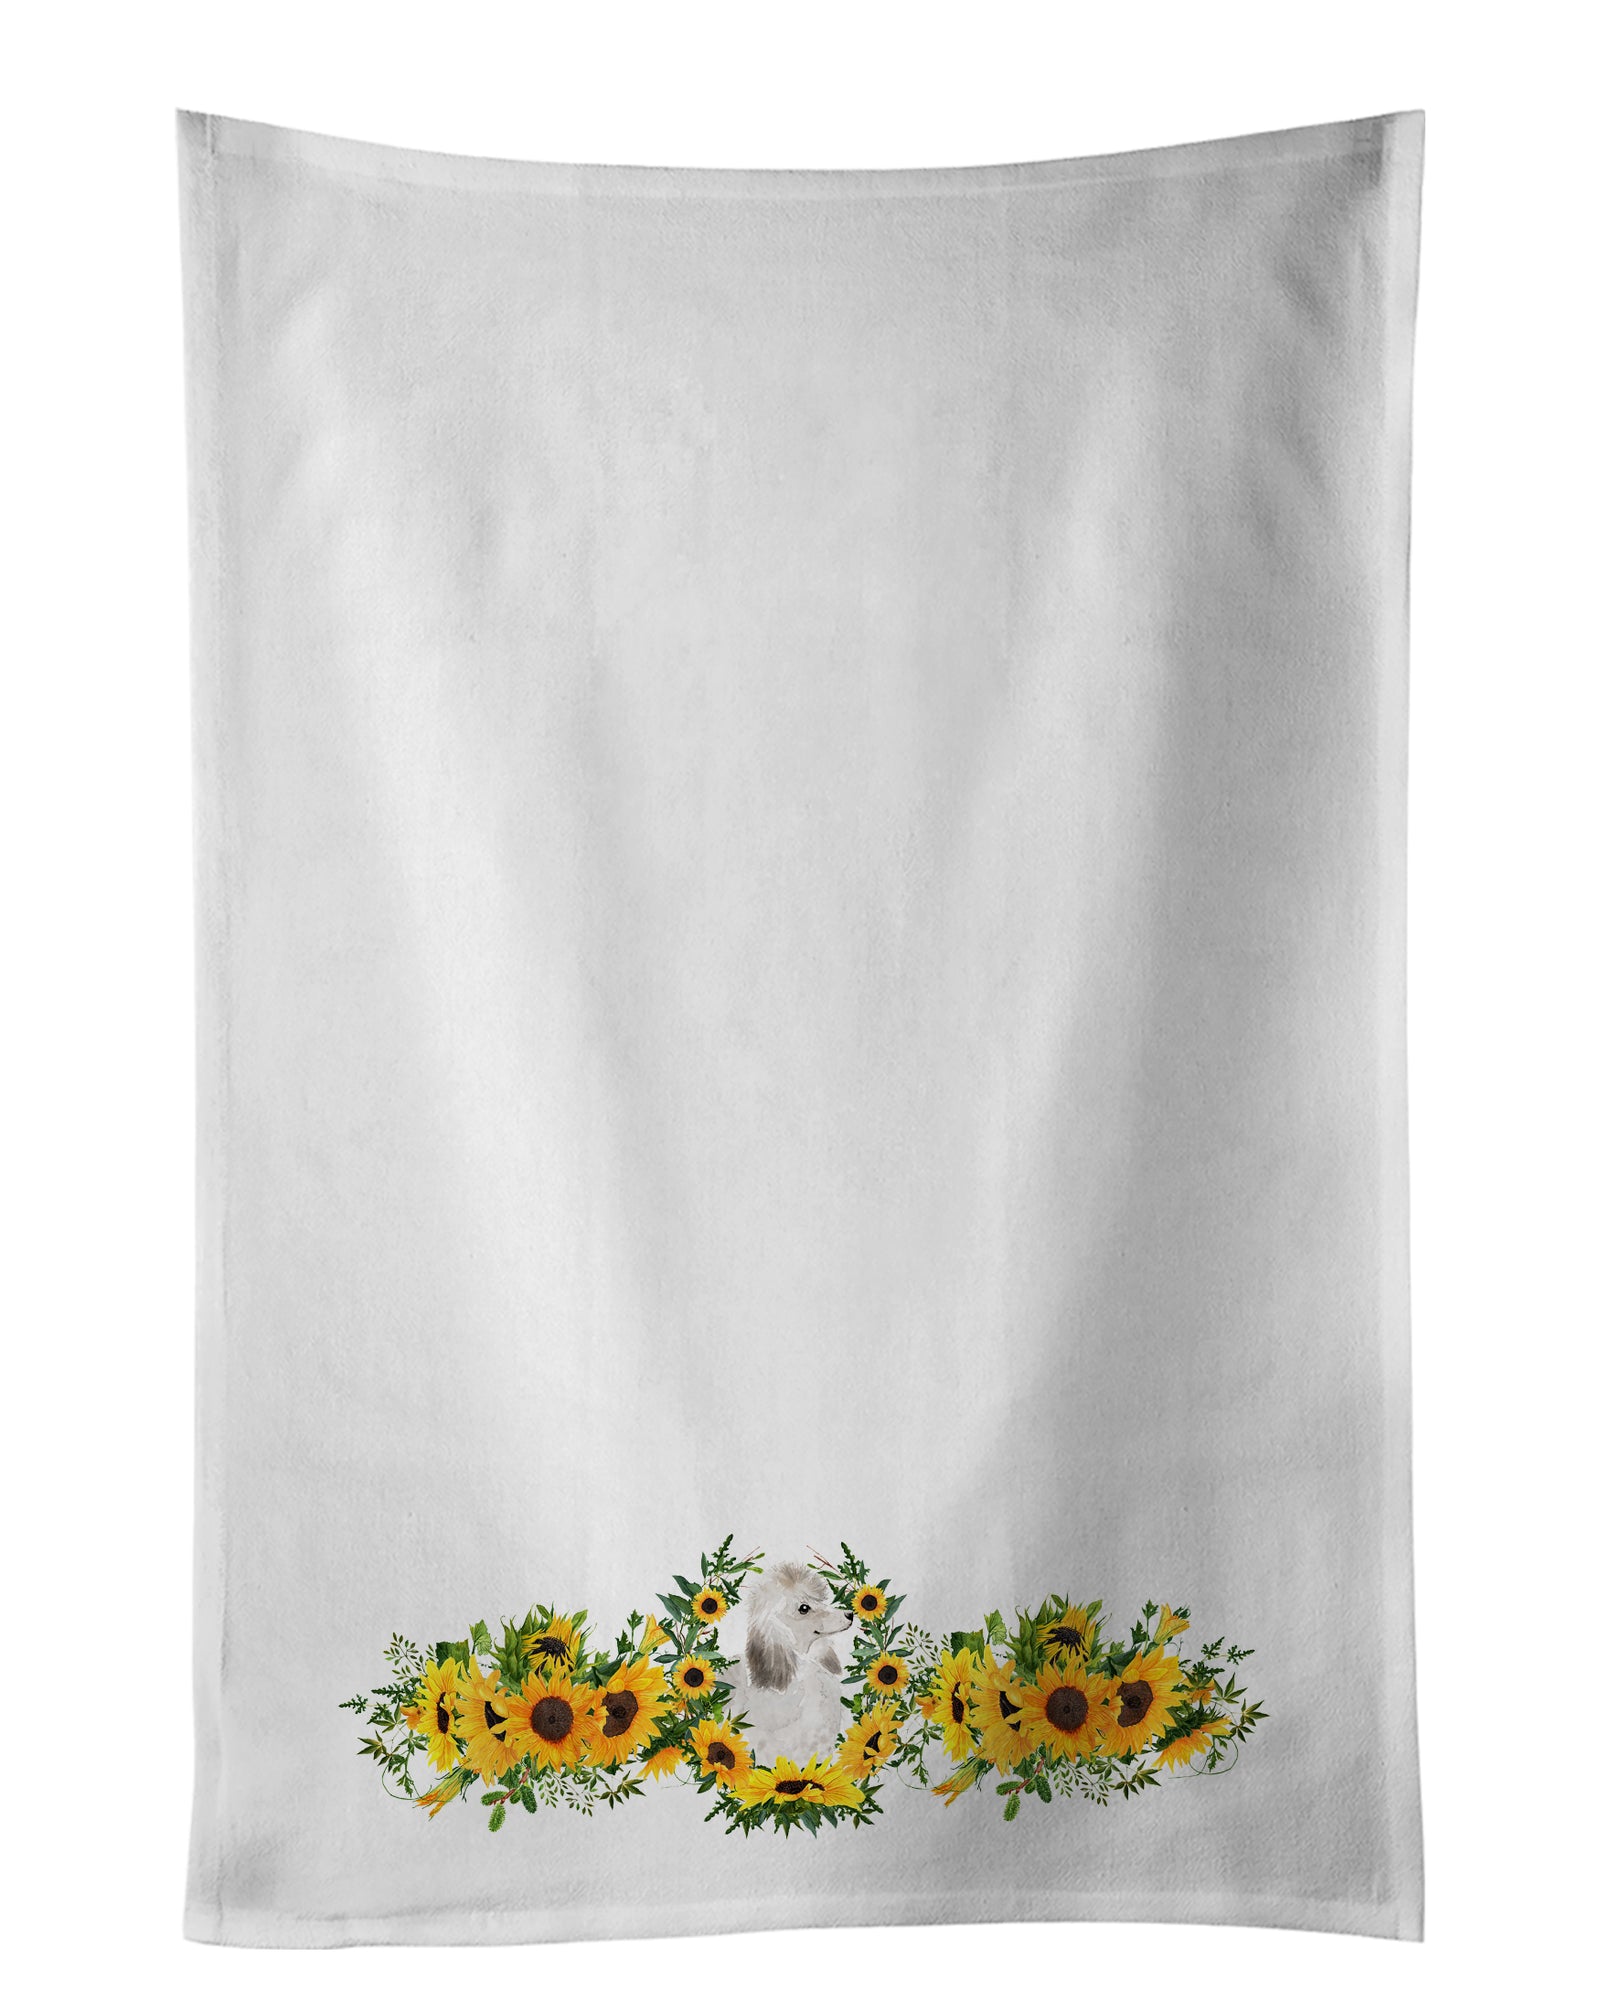 Buy this White Standard Poodle in Sunflowers White Kitchen Towel Set of 2